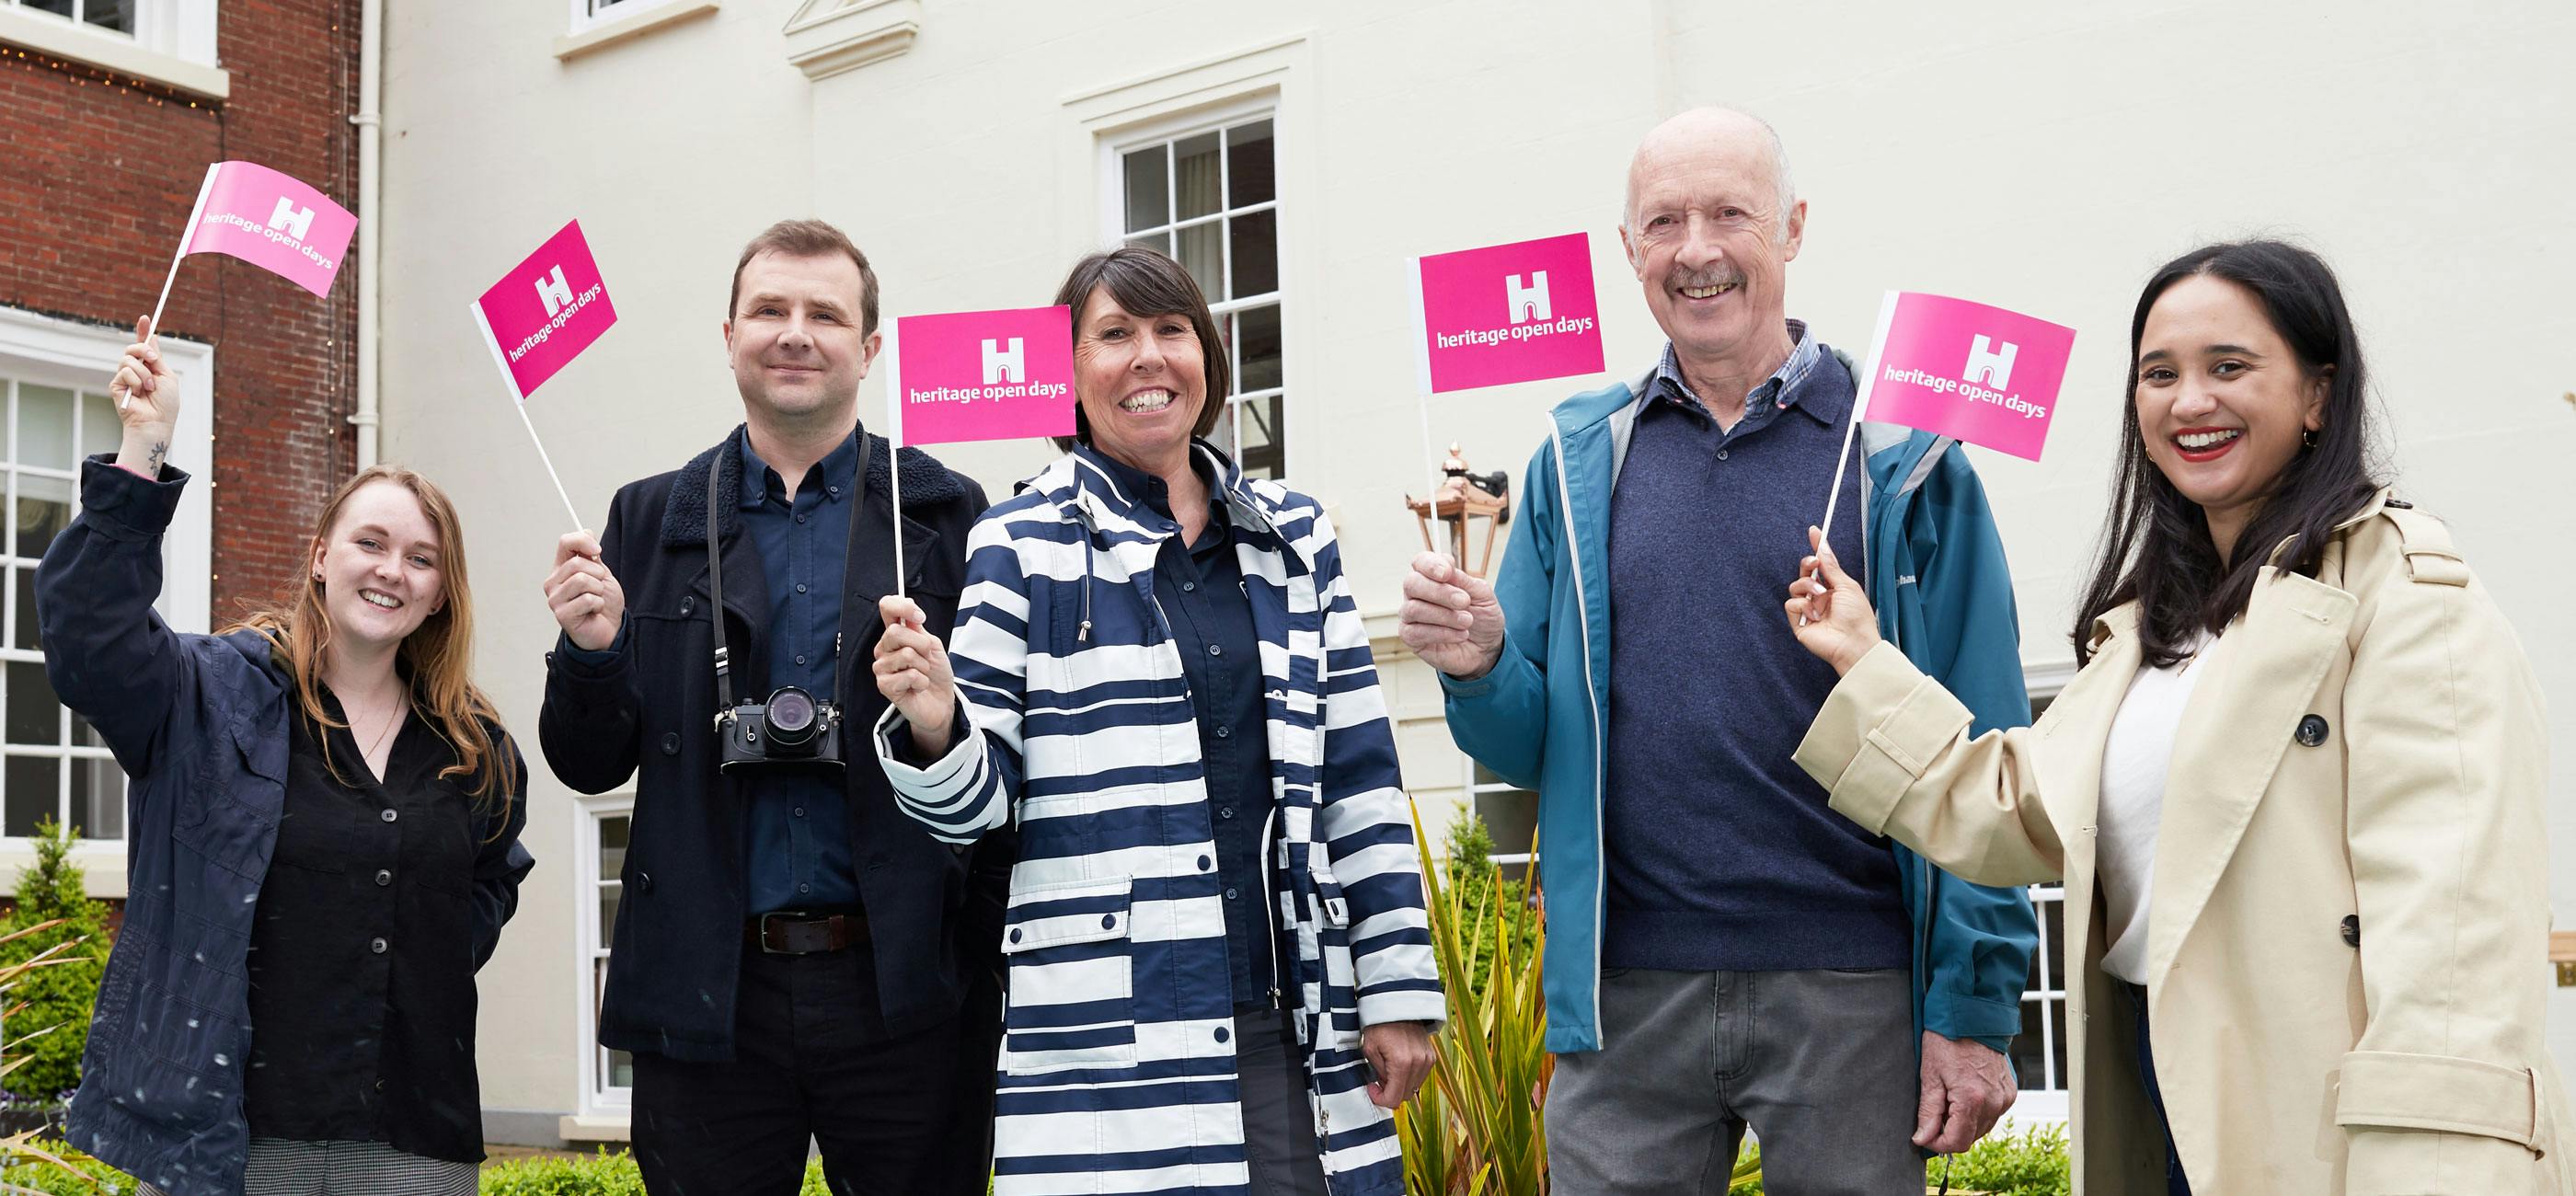 A group of people stand waving pink Heritage Open Days flags smiling.